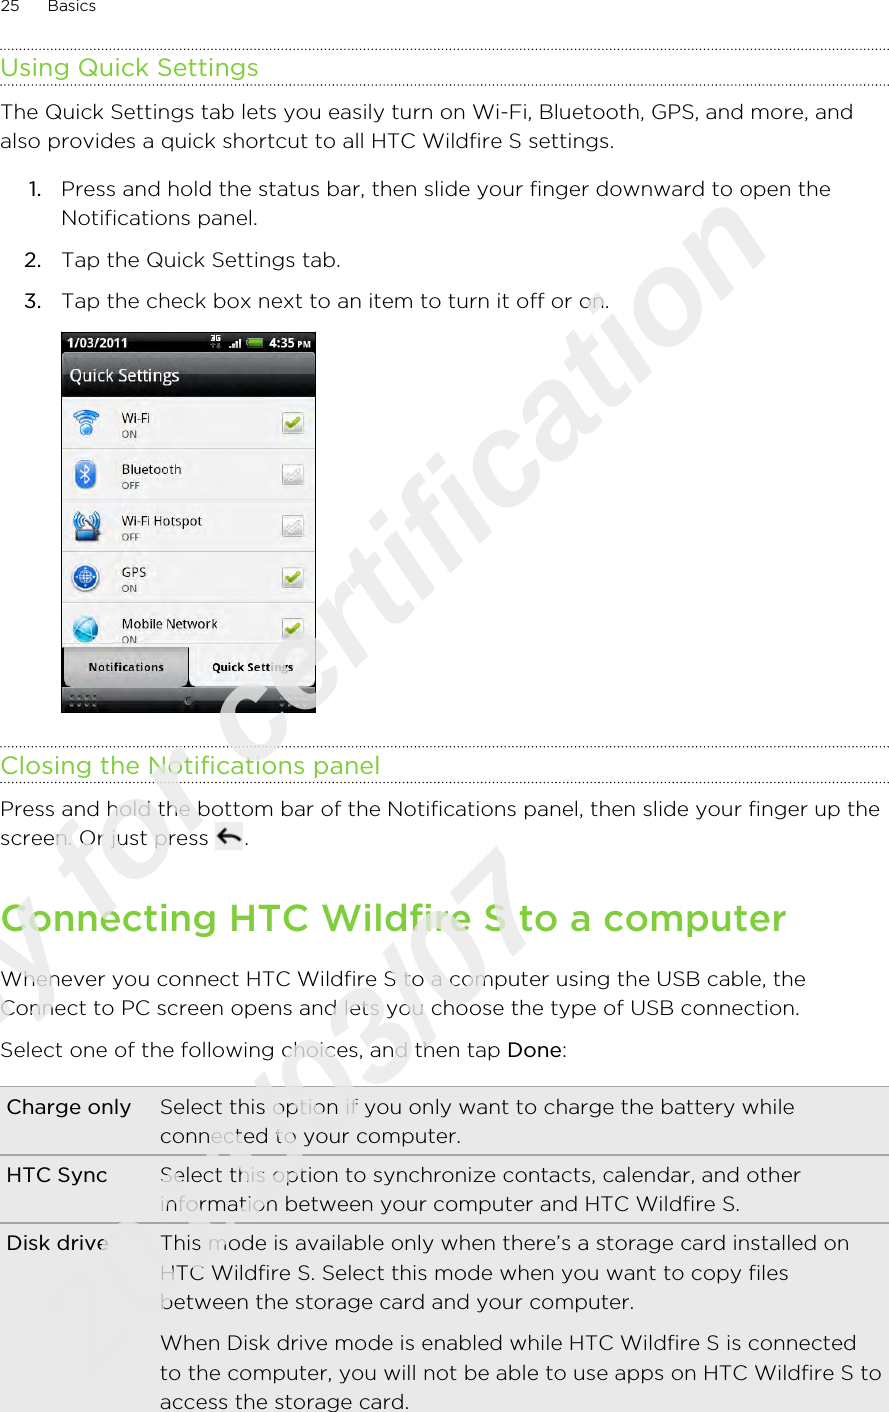 Using Quick SettingsThe Quick Settings tab lets you easily turn on Wi-Fi, Bluetooth, GPS, and more, andalso provides a quick shortcut to all HTC Wildfire S settings.1. Press and hold the status bar, then slide your finger downward to open theNotifications panel.2. Tap the Quick Settings tab.3. Tap the check box next to an item to turn it off or on. Closing the Notifications panelPress and hold the bottom bar of the Notifications panel, then slide your finger up thescreen. Or just press  .Connecting HTC Wildfire S to a computerWhenever you connect HTC Wildfire S to a computer using the USB cable, theConnect to PC screen opens and lets you choose the type of USB connection.Select one of the following choices, and then tap Done:Charge only Select this option if you only want to charge the battery whileconnected to your computer.HTC Sync Select this option to synchronize contacts, calendar, and otherinformation between your computer and HTC Wildfire S.Disk drive This mode is available only when there’s a storage card installed onHTC Wildfire S. Select this mode when you want to copy filesbetween the storage card and your computer.When Disk drive mode is enabled while HTC Wildfire S is connectedto the computer, you will not be able to use apps on HTC Wildfire S toaccess the storage card.25 BasicsOnly for certification  2011/03/07